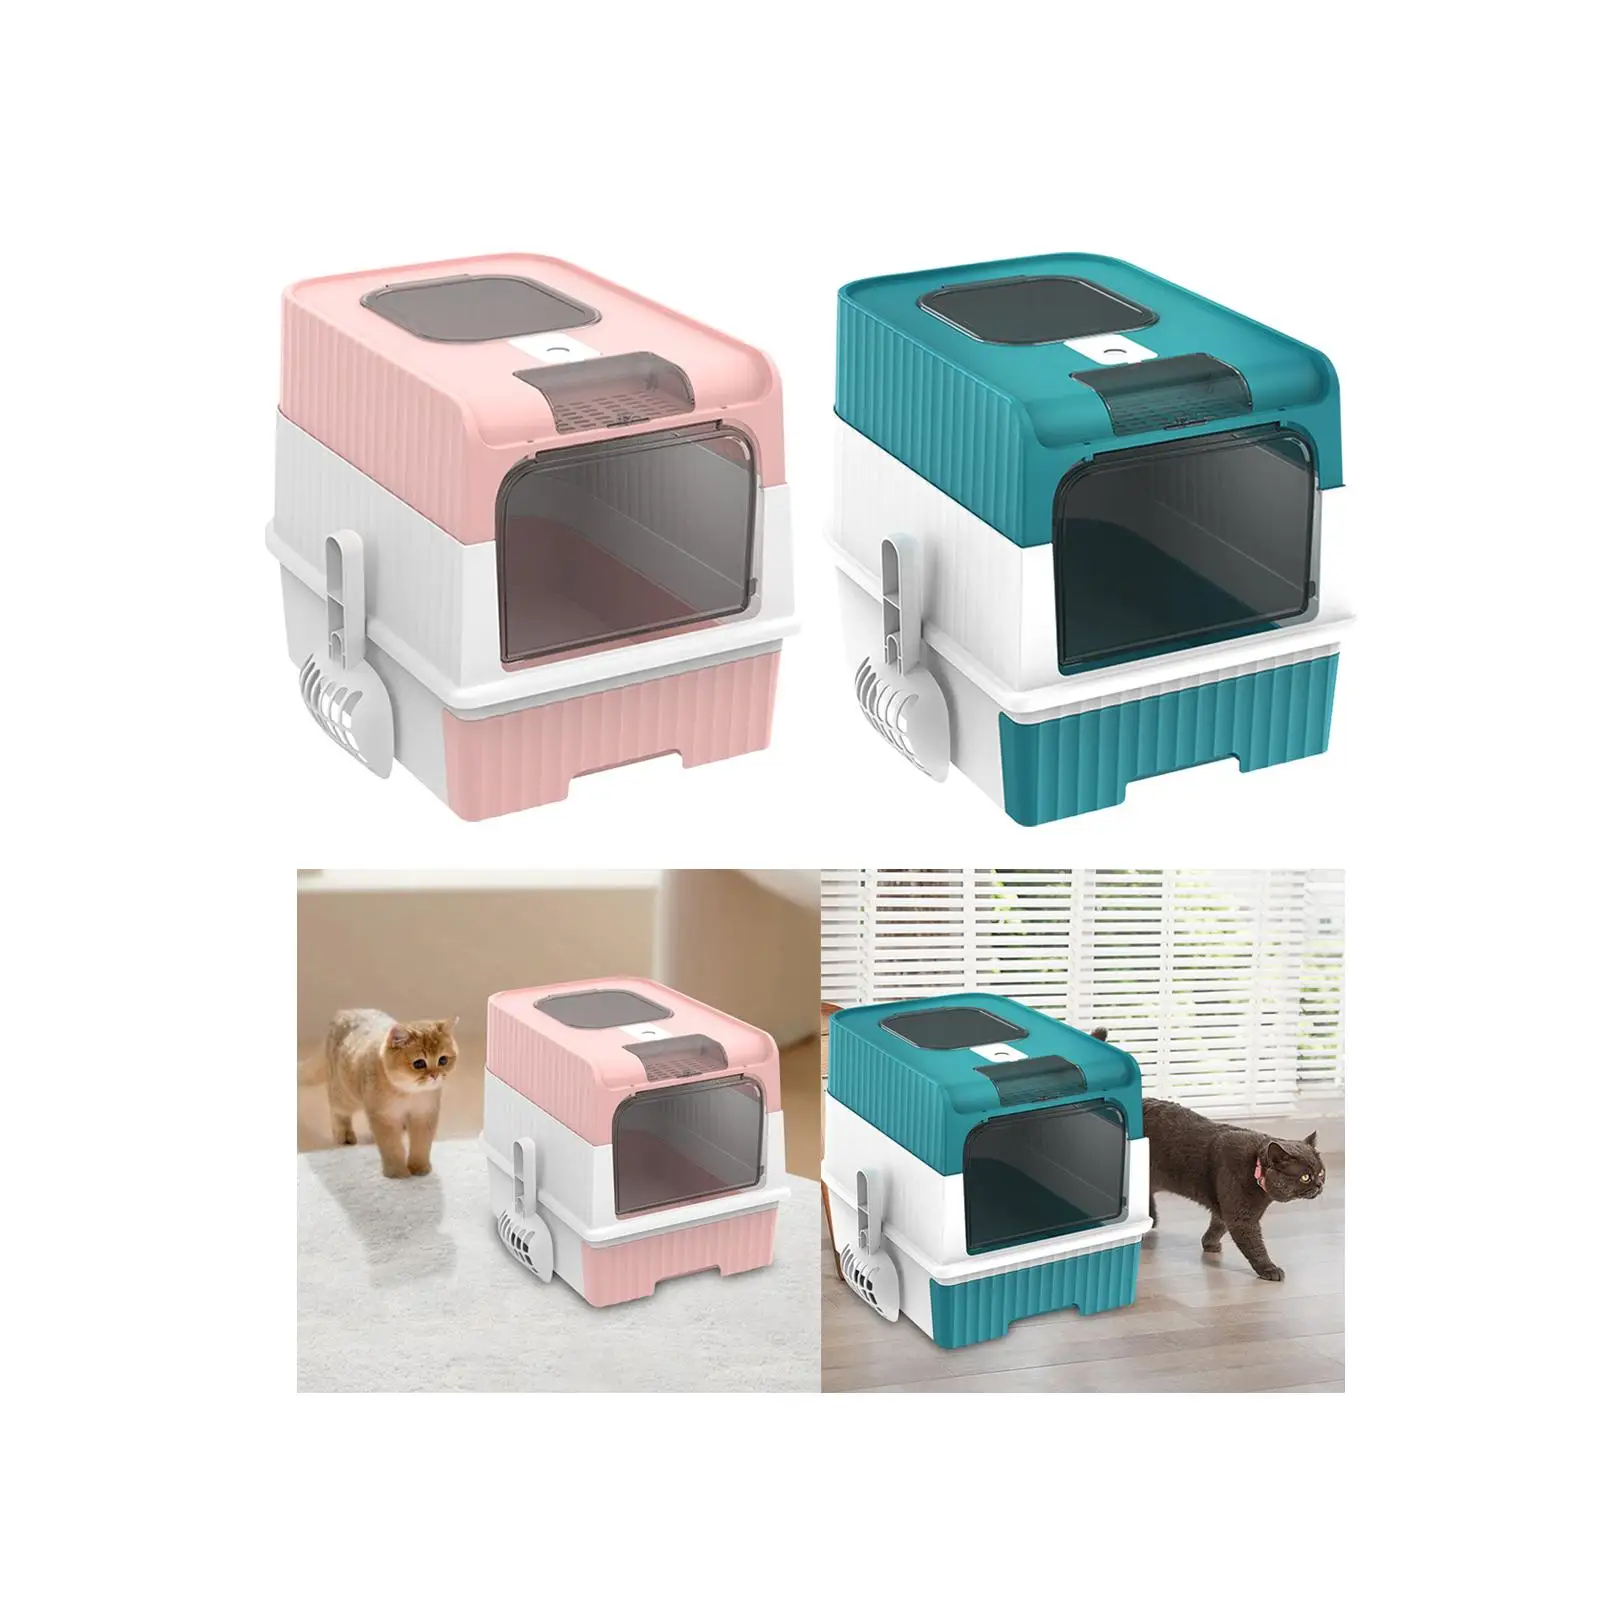 Hooded Cat Litter Boxes with Portable Privacy Removable Anti Splashing Pet Supplies Fully Enclosed with Lid Kitten Potty